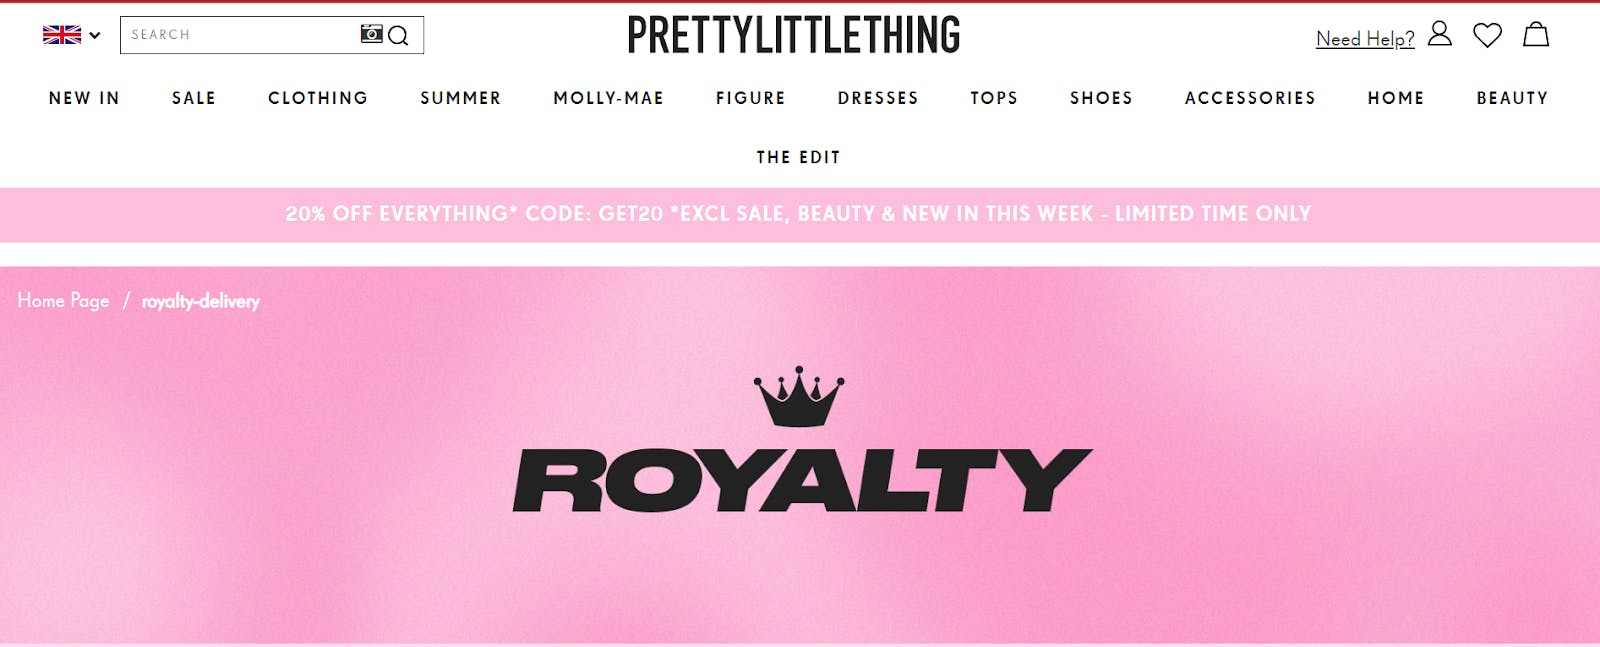 The Pretty Little Thing membership signup page.